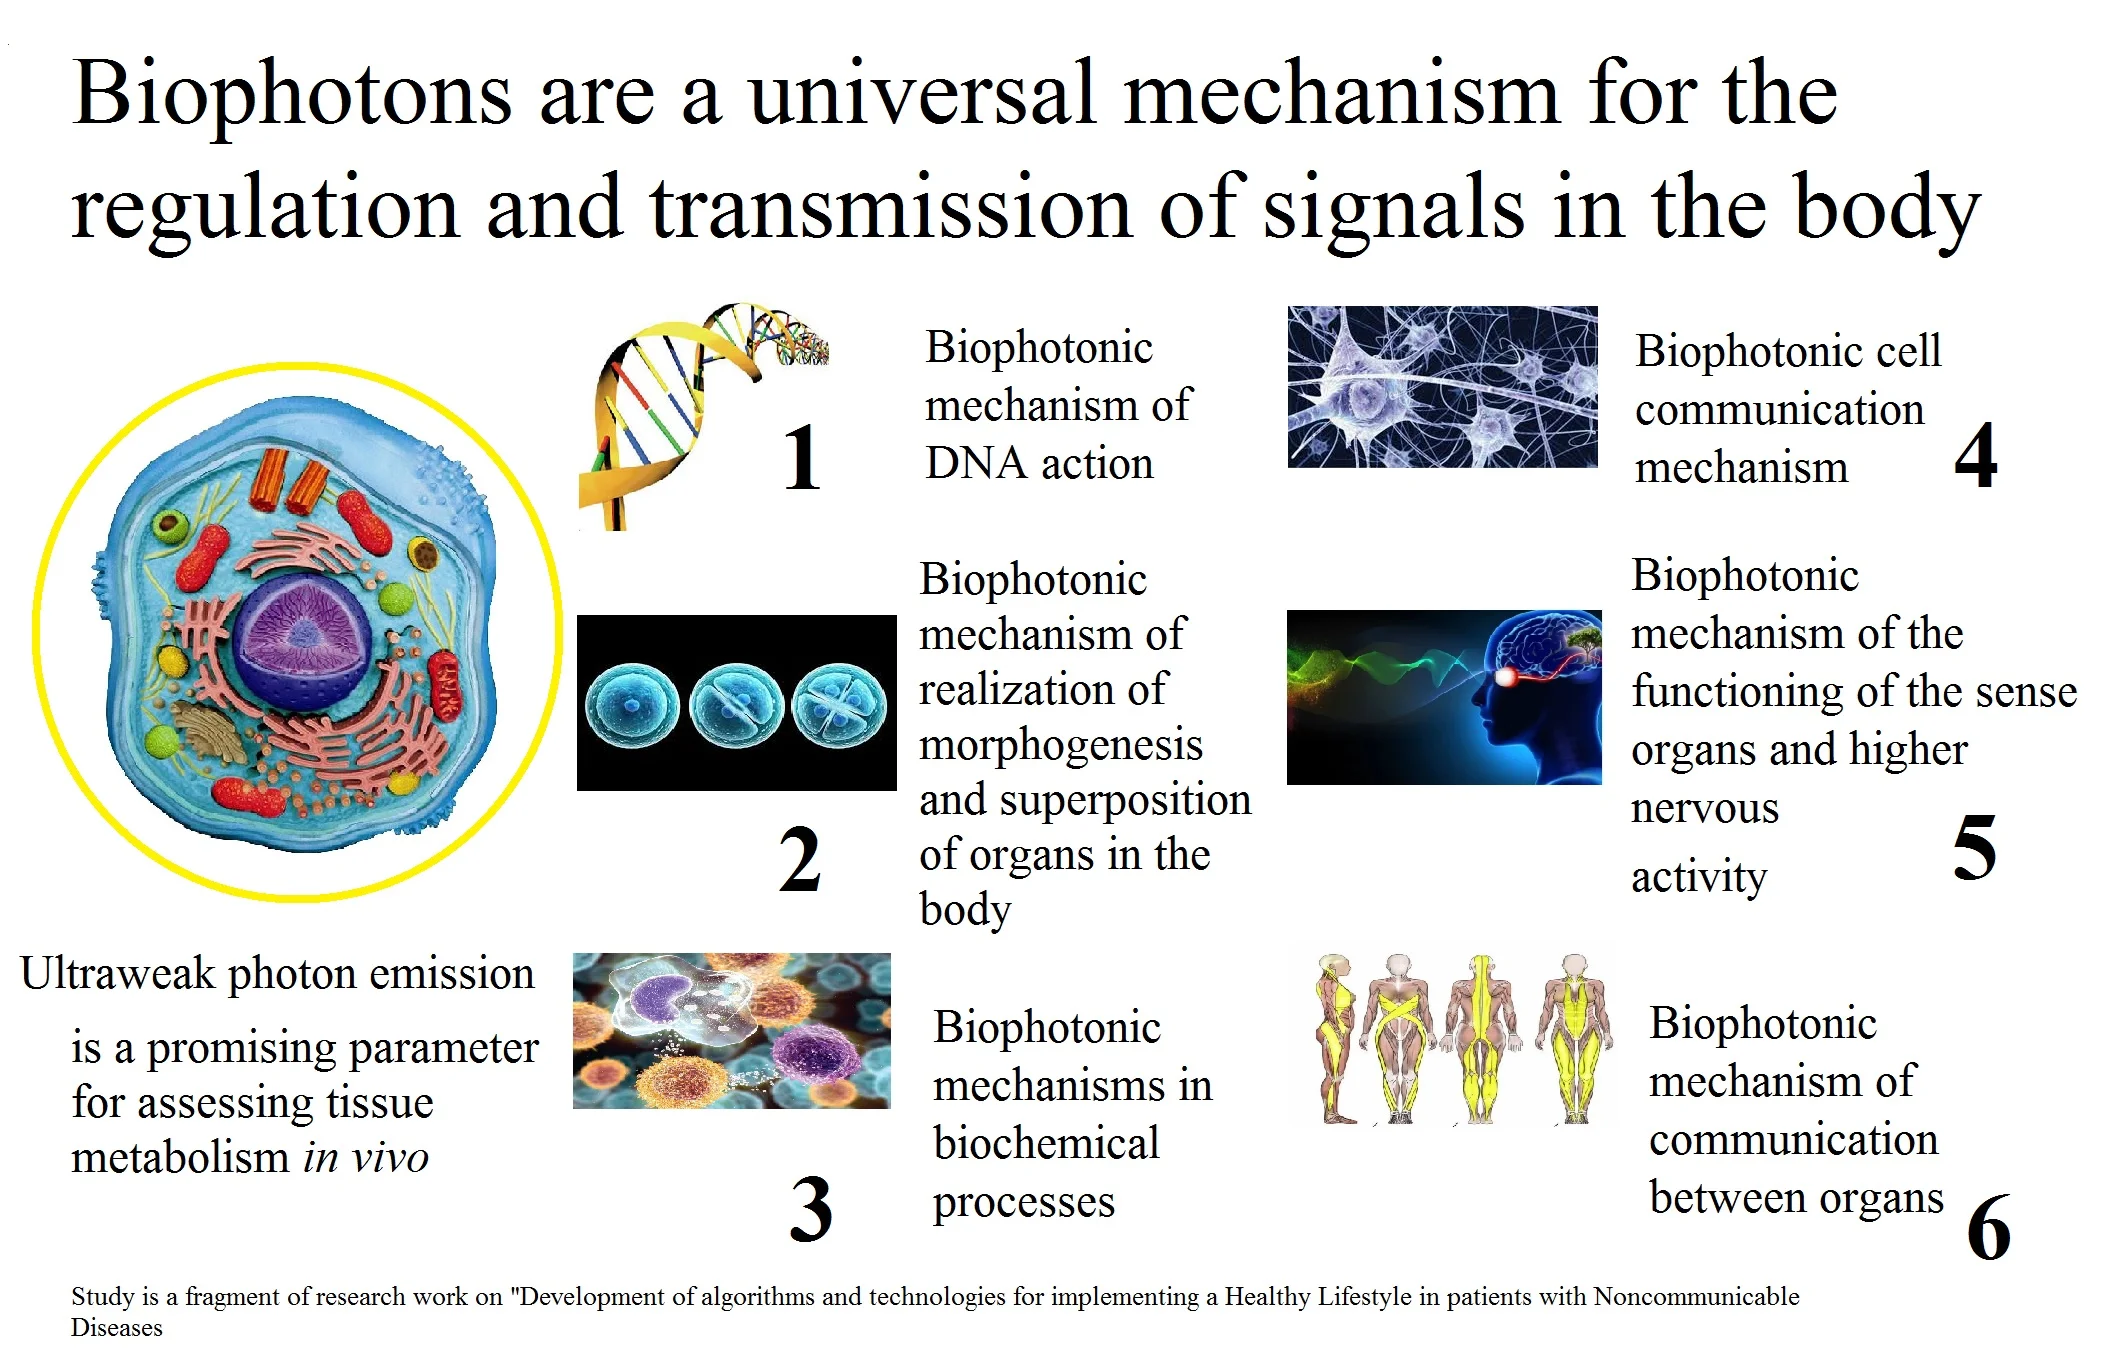 Modern biophysical view of electromagnetic processes of the phenomenon of life of living biological systems as a promising basis for the development of complex medicine: the role of biophotons